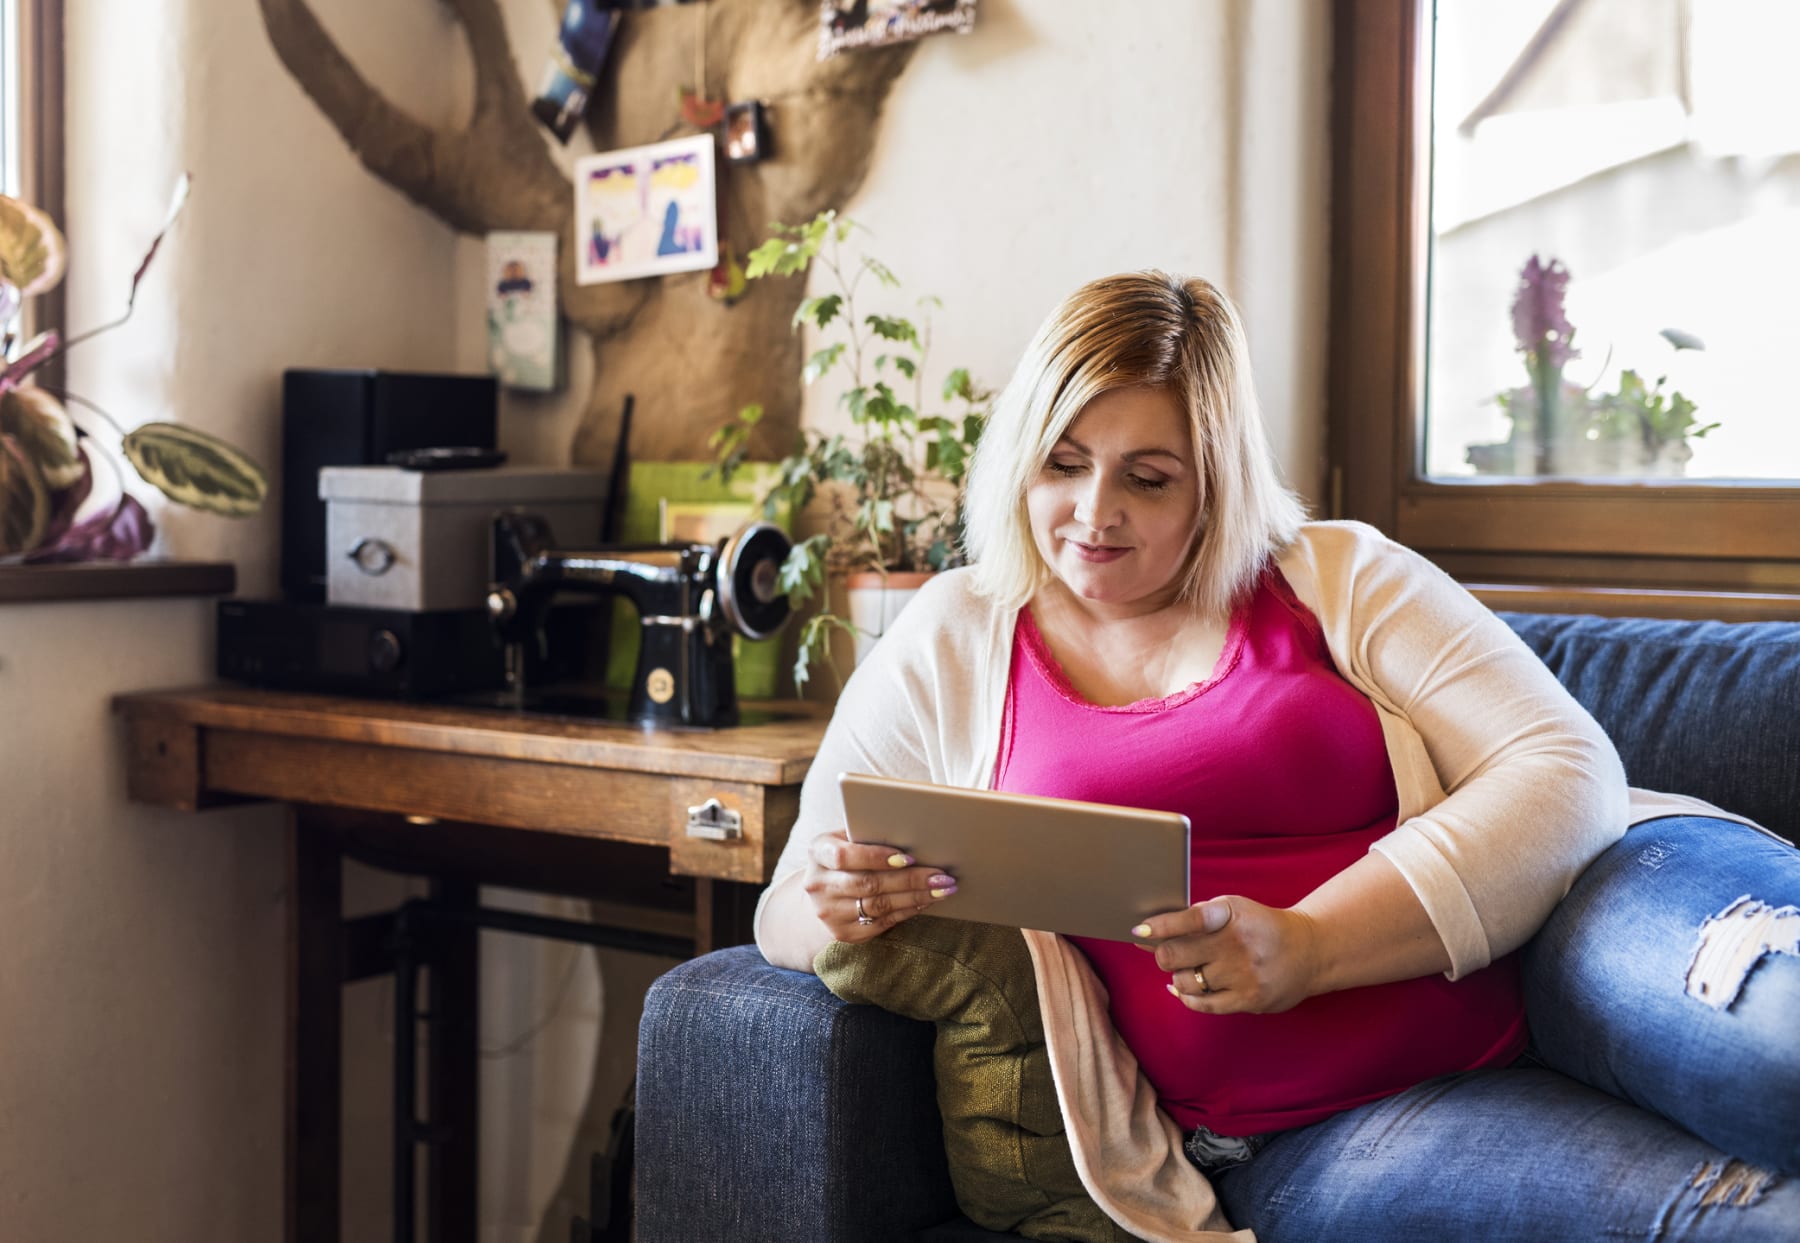 Woman looks at tablet while sitting on couch.